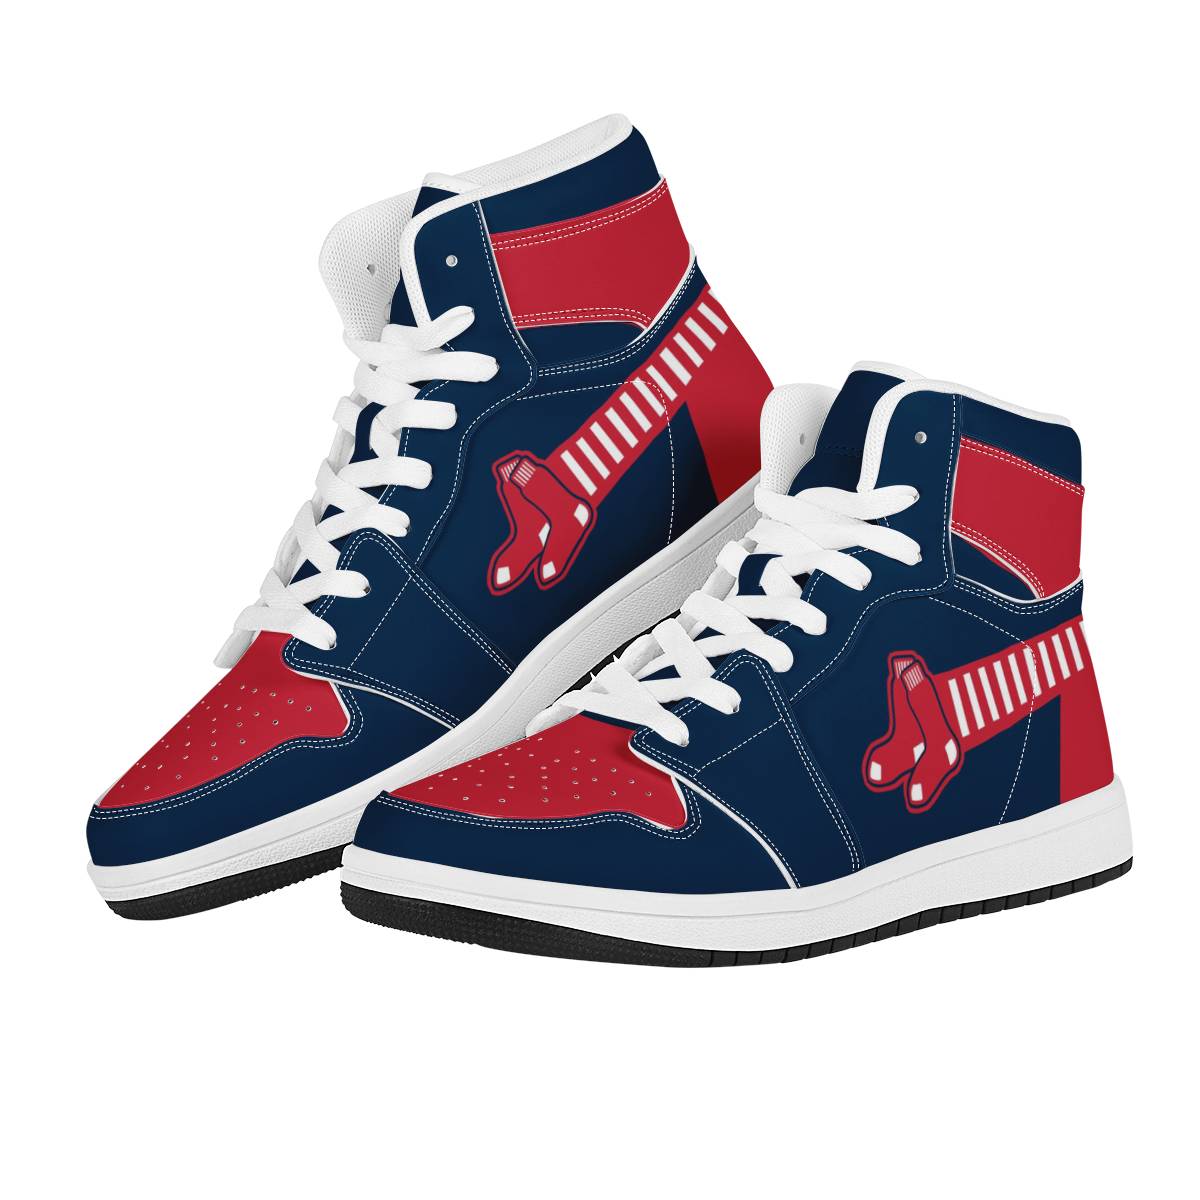 Women's Boston Red Sox High Top Leather AJ1 Sneakers 002